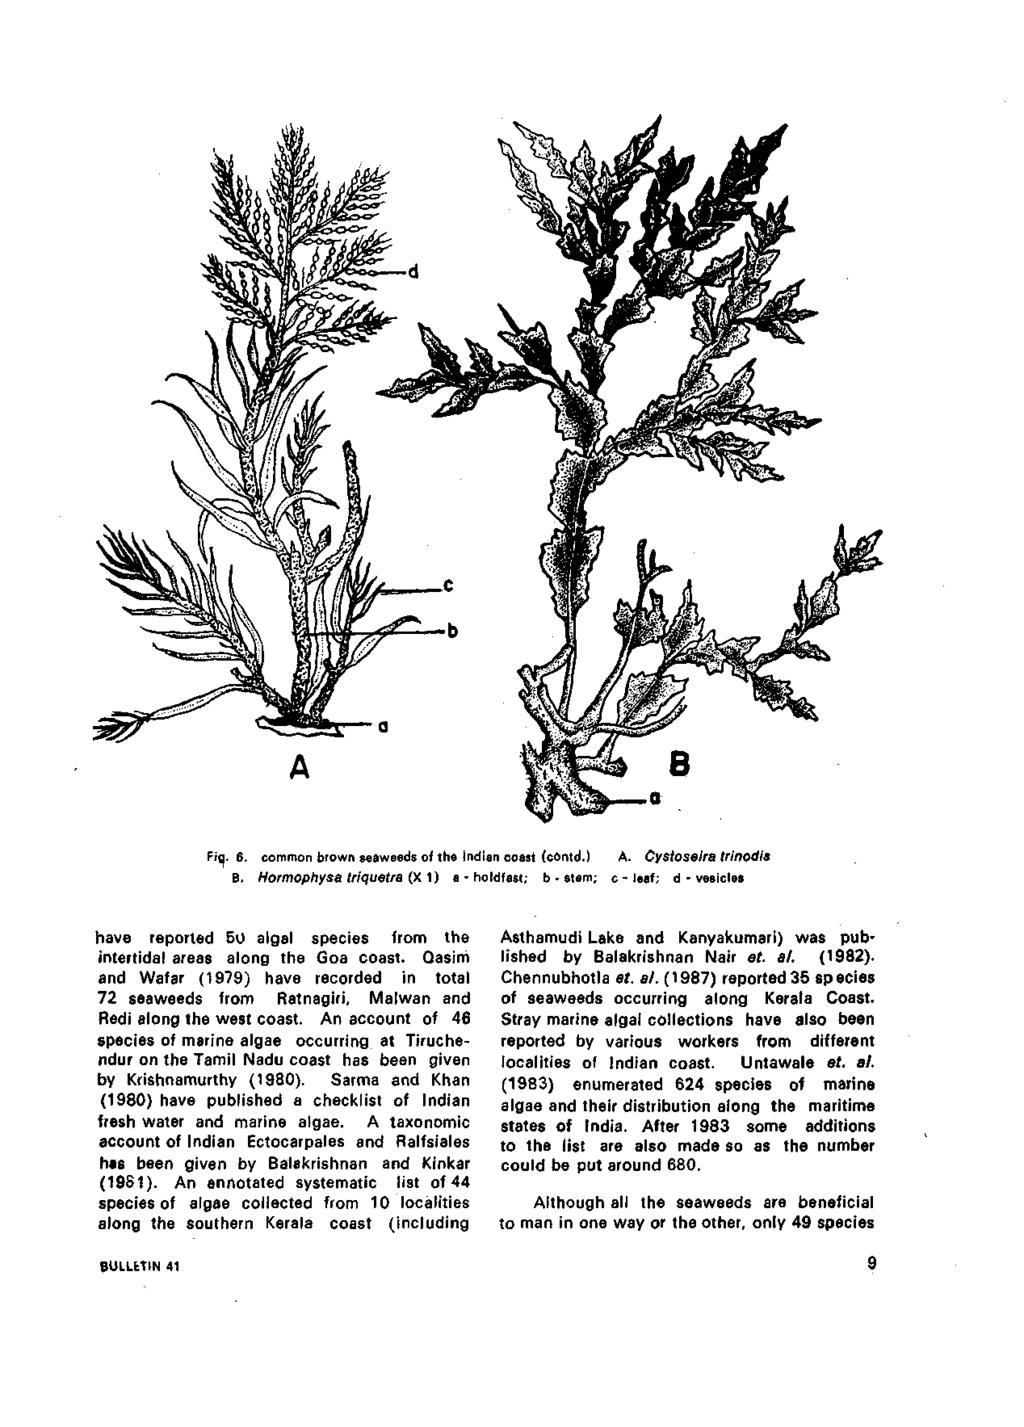 Fig. 6. common brown seaweeds of the Indian coast (c6ntd.) B. Hormophysatriquetra(y.\) a - holdfast; b - stem; A.